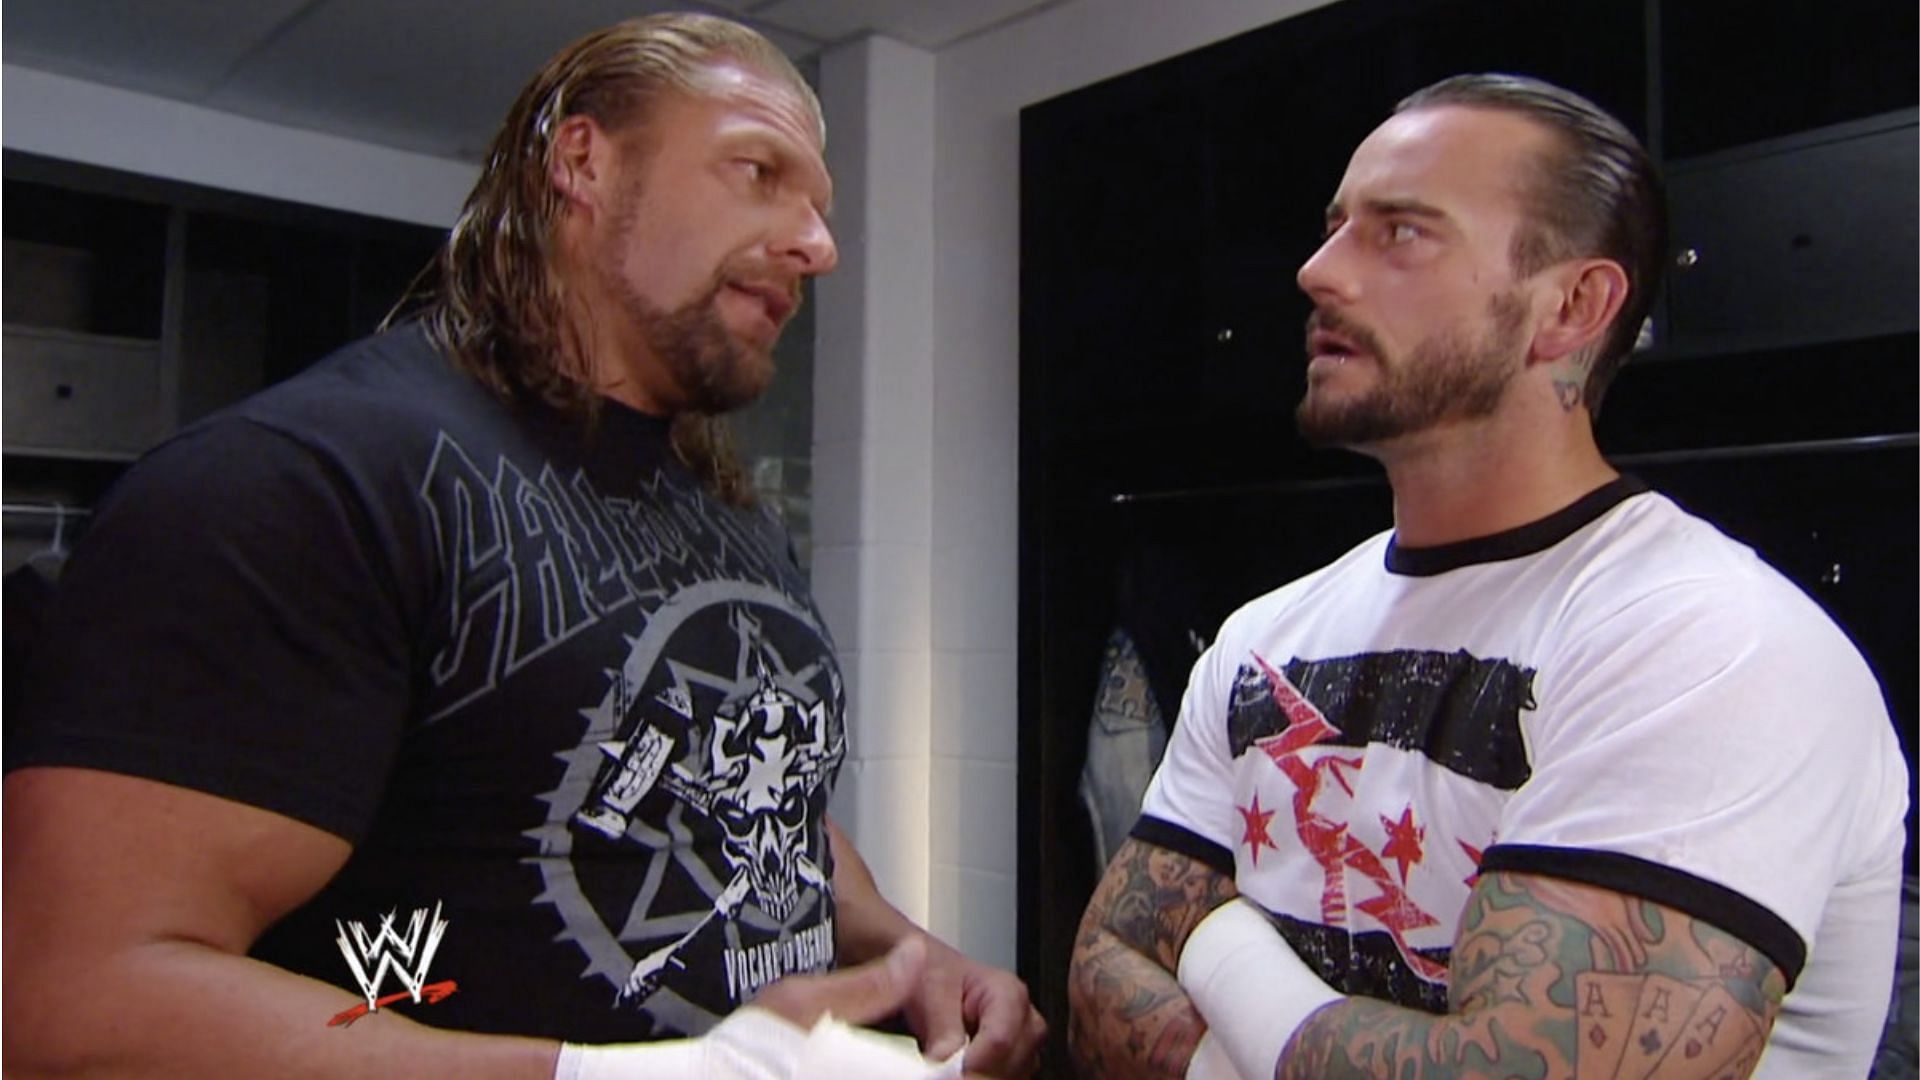 Triple H and CM Punk during a backstage WWE segment.